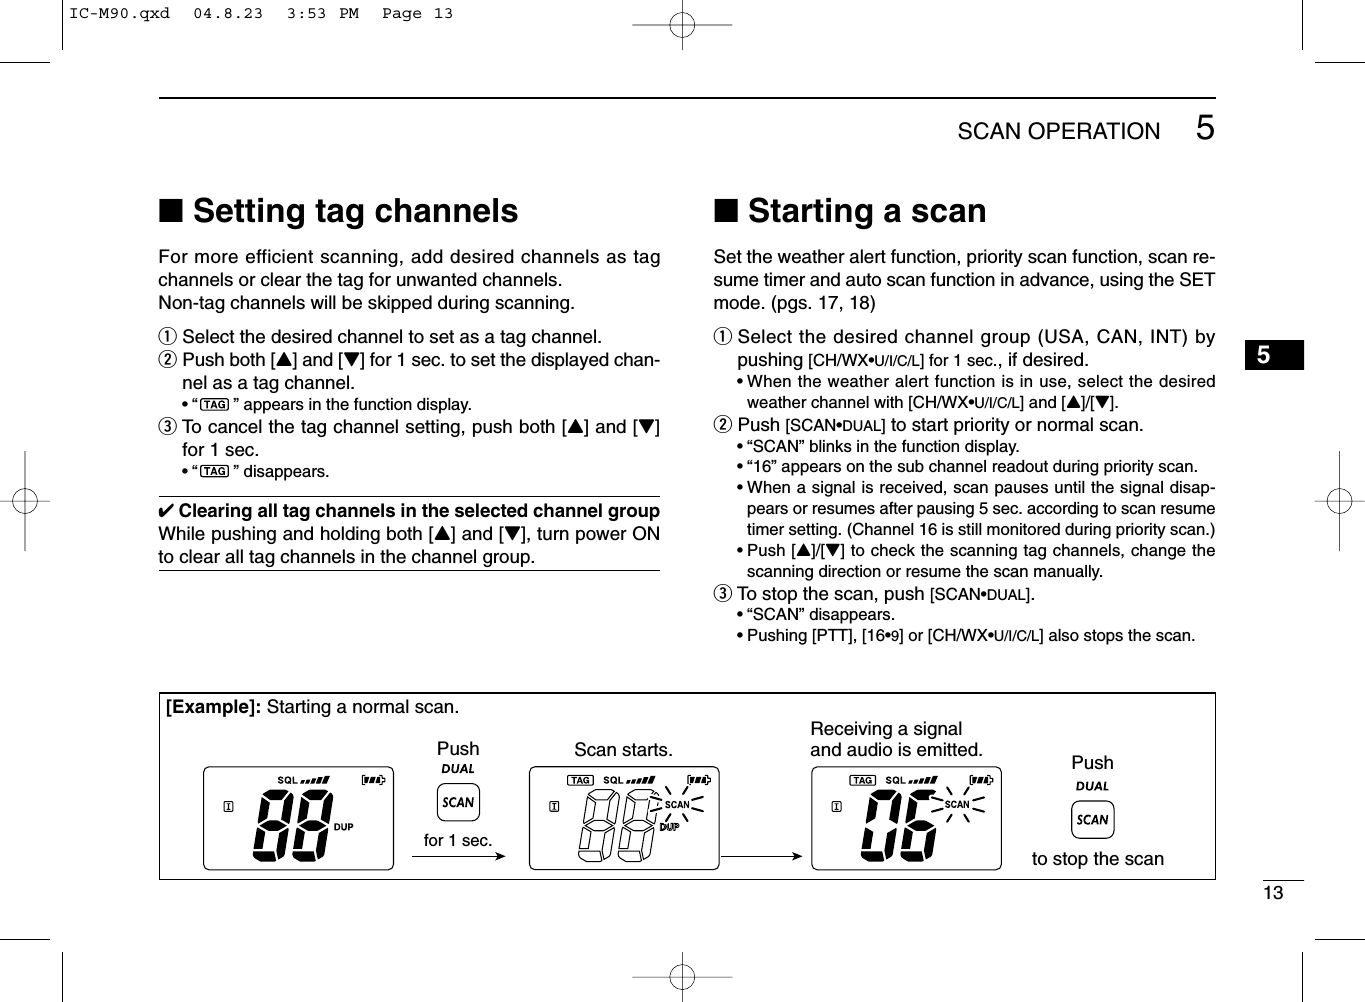 135SCAN OPERATION5■Setting tag channelsFor more efficient scanning, add desired channels as tagchannels or clear the tag for unwanted channels.Non-tag channels will be skipped during scanning.qSelect the desired channel to set as a tag channel.wPush both [Y] and [Z] for 1 sec. to set the displayed chan-nel as a tag channel.•“ ” appears in the function display.eTo cancel the tag channel setting, push both [Y] and [Z]for 1 sec.•“ ” disappears.✔Clearing all tag channels in the selected channel groupWhile pushing and holding both [Y] and [Z], turn power ONto clear all tag channels in the channel group.■Starting a scanSet the weather alert function, priority scan function, scan re-sume timer and auto scan function in advance, using the SETmode. (pgs. 17, 18)qSelect the desired channel group (USA, CAN, INT) bypushing [CH/WX•U/I/C/L] for 1 sec., if desired.•When the weather alert function is in use, select the desiredweather channel with [CH/WX•U/I/C/L] and [Y]/[Z].wPush [SCAN•DUAL]to start priority or normal scan.•“SCAN” blinks in the function display.•“16” appears on the sub channel readout during priority scan.•When a signal is received, scan pauses until the signal disap-pears or resumes after pausing 5 sec. according to scan resumetimer setting. (Channel 16 is still monitored during priority scan.)•Push [Y]/[Z] to check the scanning tag channels, change thescanning direction or resume the scan manually.eTo stop the scan, push [SCAN•DUAL].•“SCAN” disappears.•Pushing [PTT], [16•9] or [CH/WX•U/I/C/L] also stops the scan.[Example]: Starting a normal scan.Scan starts.Pushto stop the scanReceiving a signal and audio is emitted.for 1 sec.PushIC-M90.qxd  04.8.23  3:53 PM  Page 13